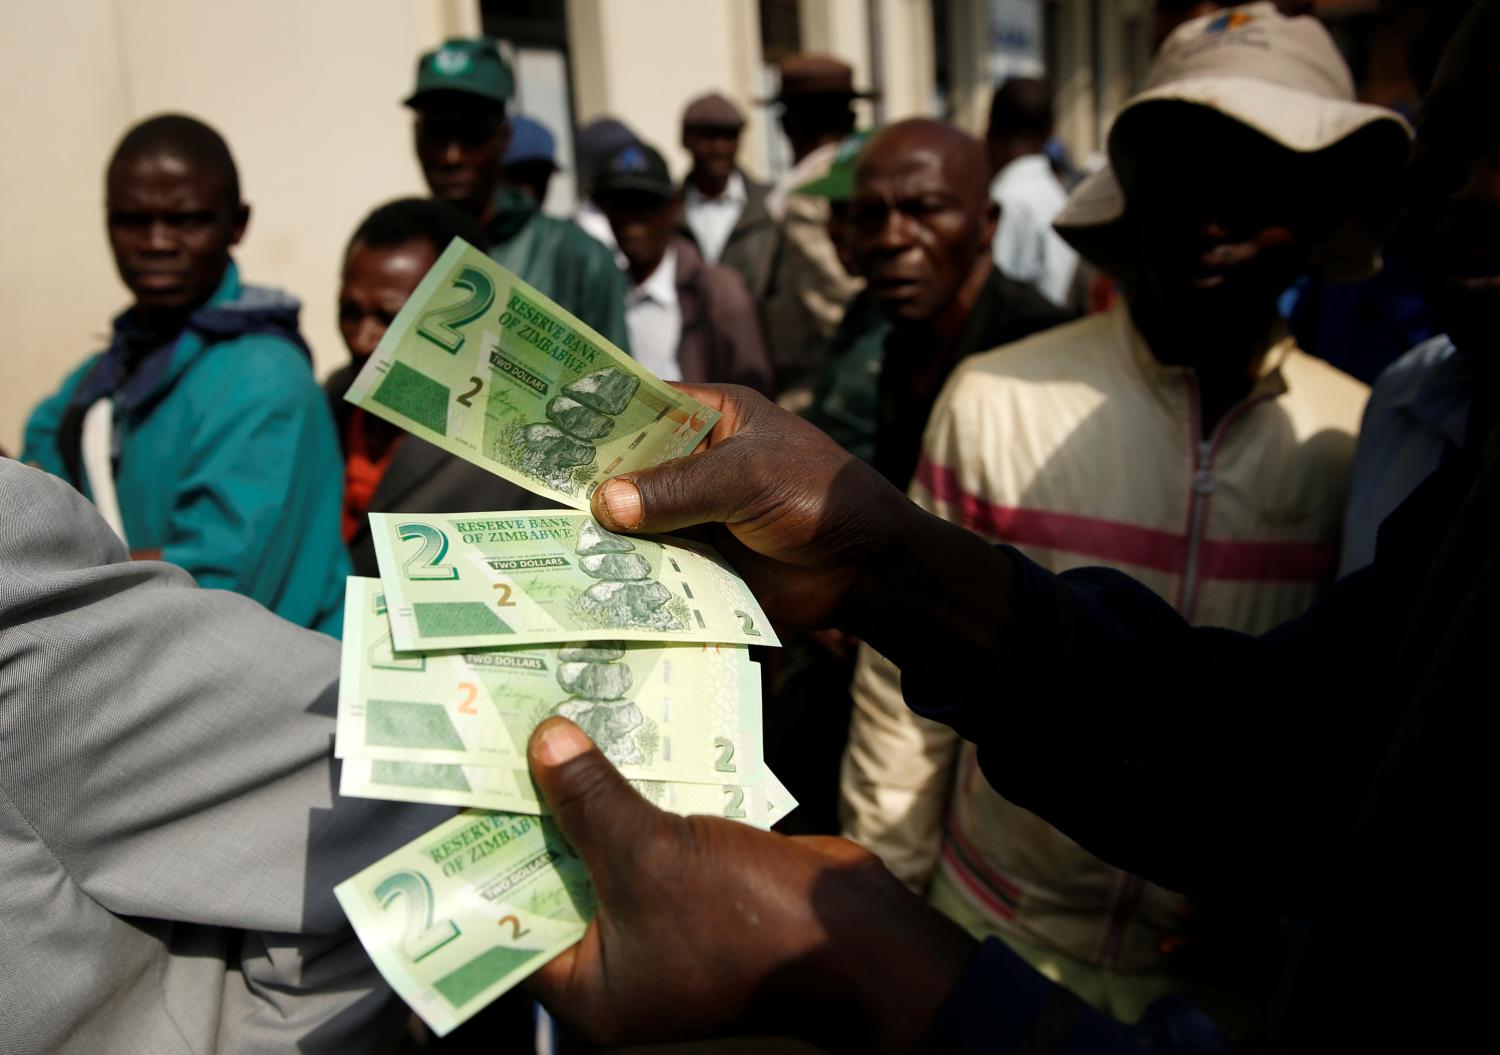 A man poses with Zimbabwe's new two dollar banknotes as customers queue outside a bank in Harare, Zimbabwe, November 12, 2019. REUTERS/Philimon Bulawayo - RC2J9D9ID88X